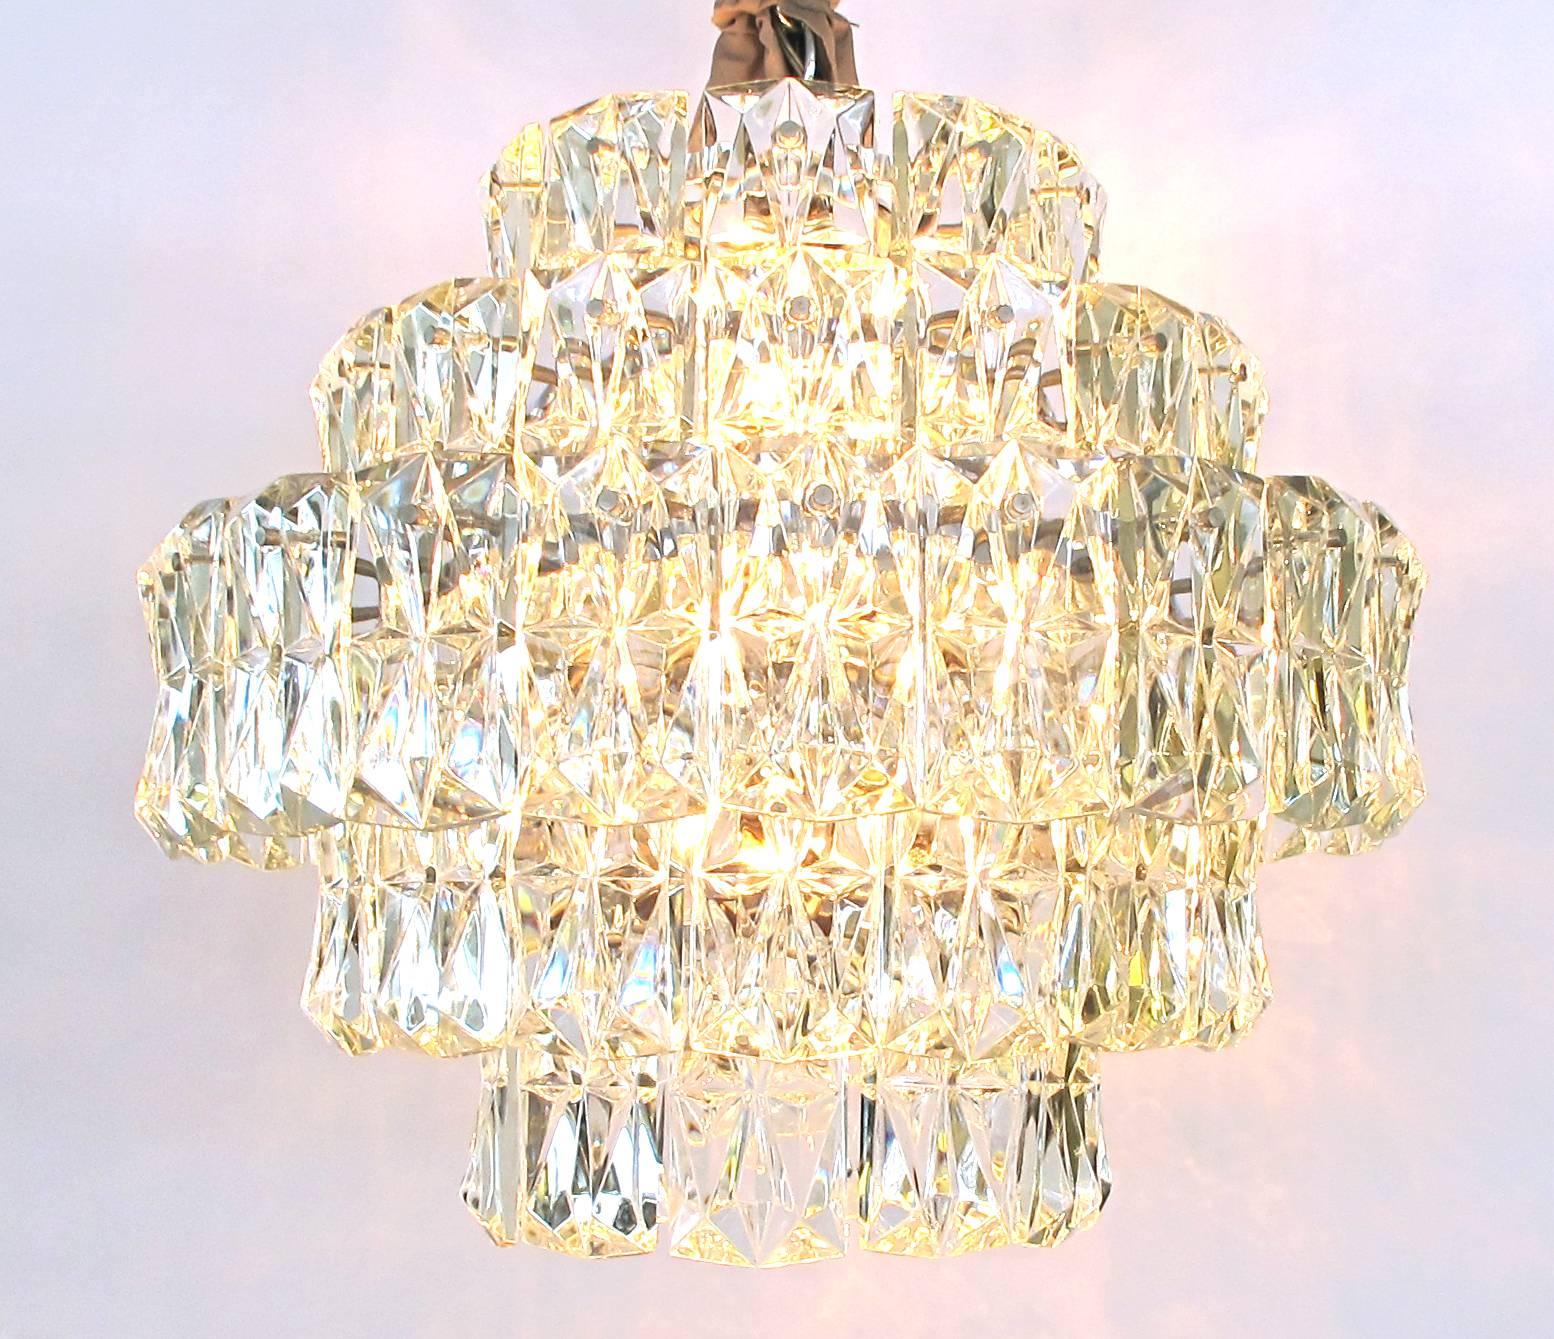 A striking German 1960s Kinkeldey Lighting five-tier chandelier with polished chrome frame and molded crystals; this shimmering Mid-Century Modern five-tier chandelier with its rectangular faceted crystals by Kinkeldey Lighting, Bad Pyrmont, Germany.